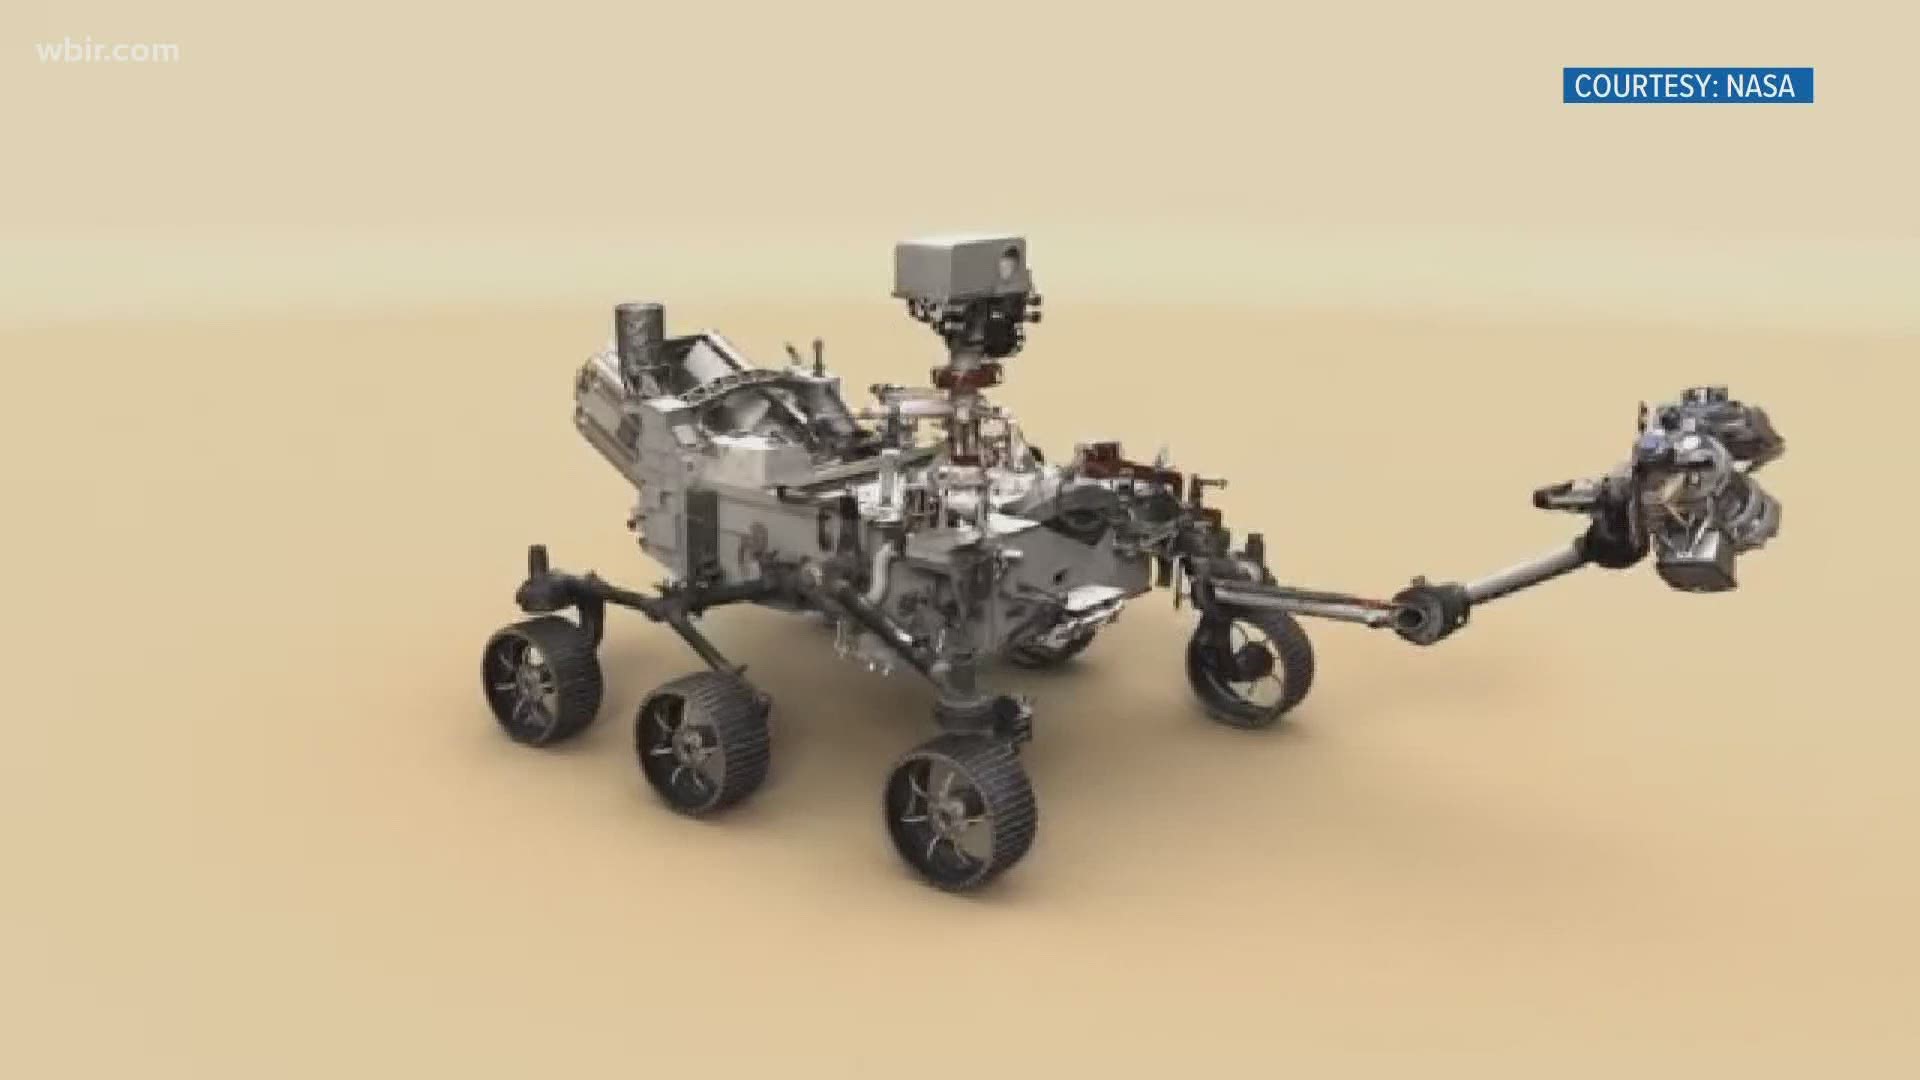 NASA is preparing for its latest Mars Rover Mission with help from scientists here in East Tennessee. The Oak Ridge National Lab developed the fuel powering it.